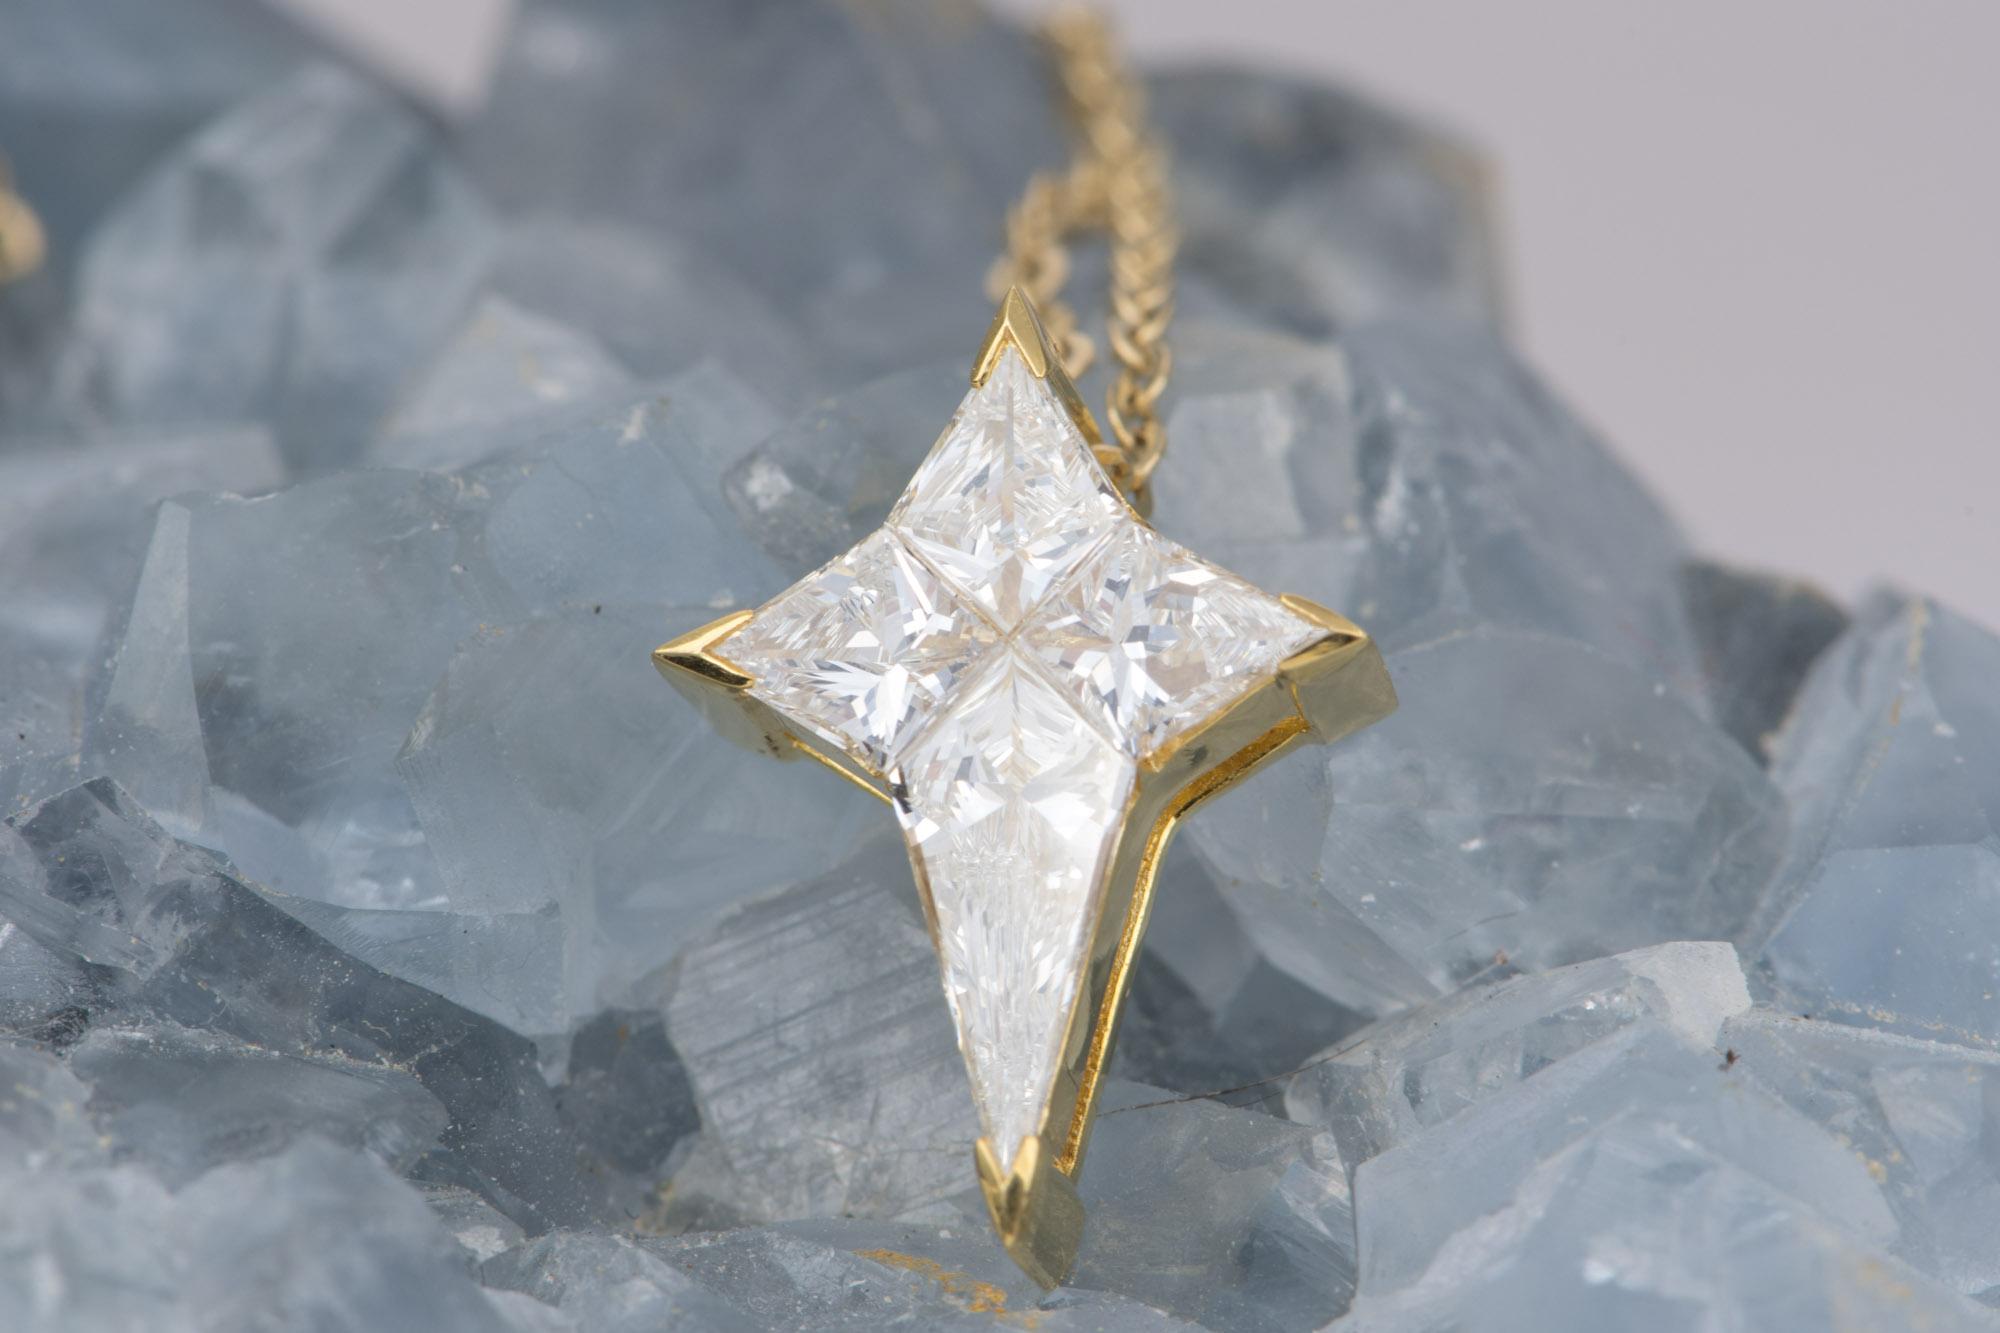 ♥   We have set four beautiful white diamonds in a pretty star-shaped pendant with an invisible setting in solid 18k yellow gold 
♥   Note: this pendant is set with 4 kite-shaped diamonds. It is not one piece of diamond.

♥  You are buying the